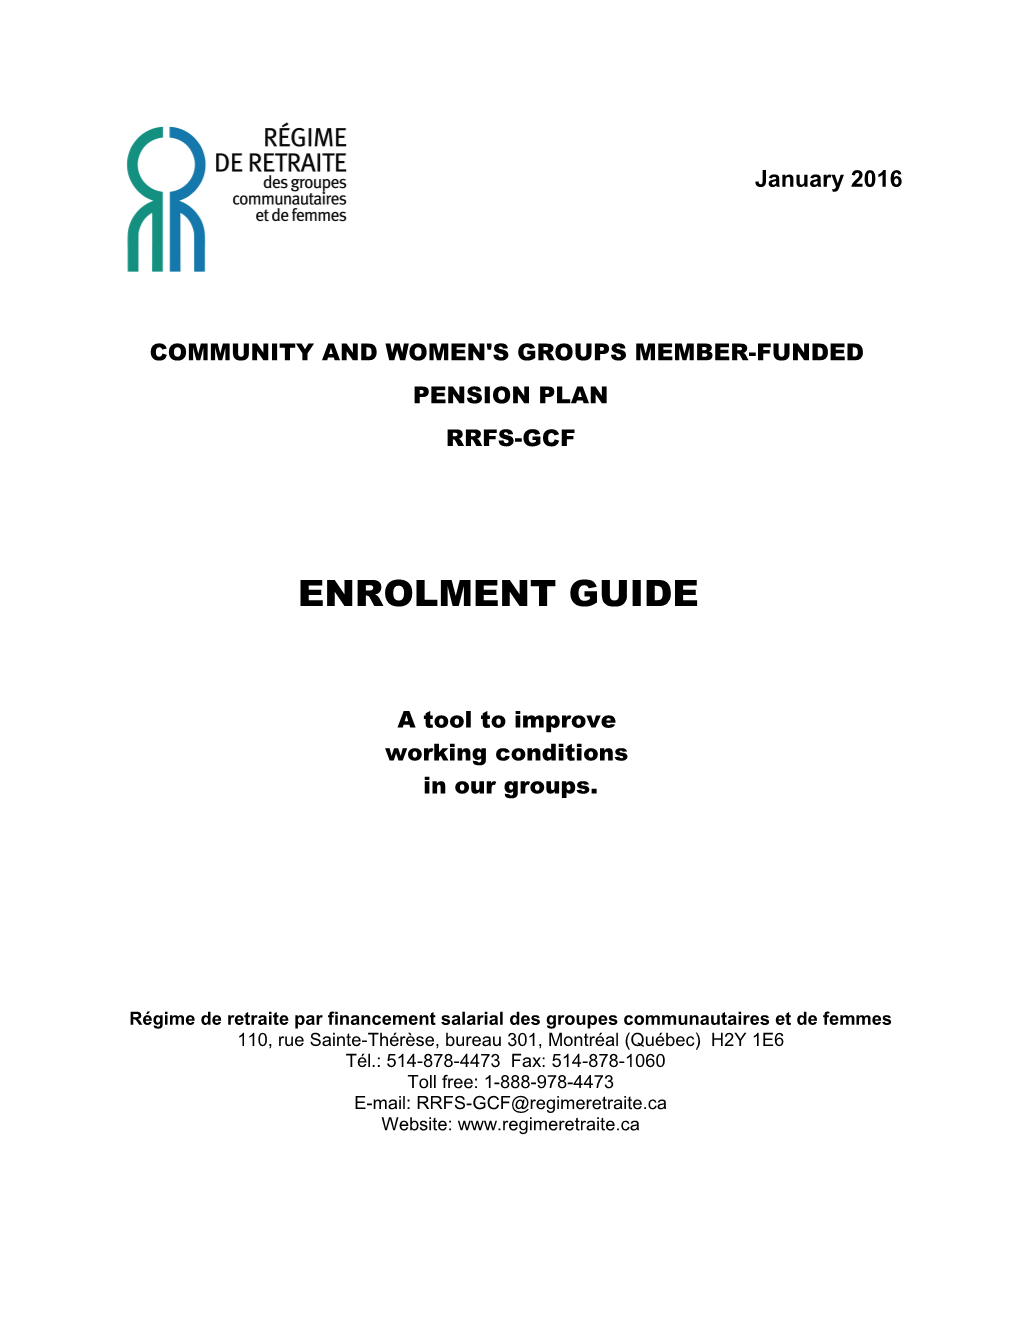 Community and Women's Groups Member-Funded